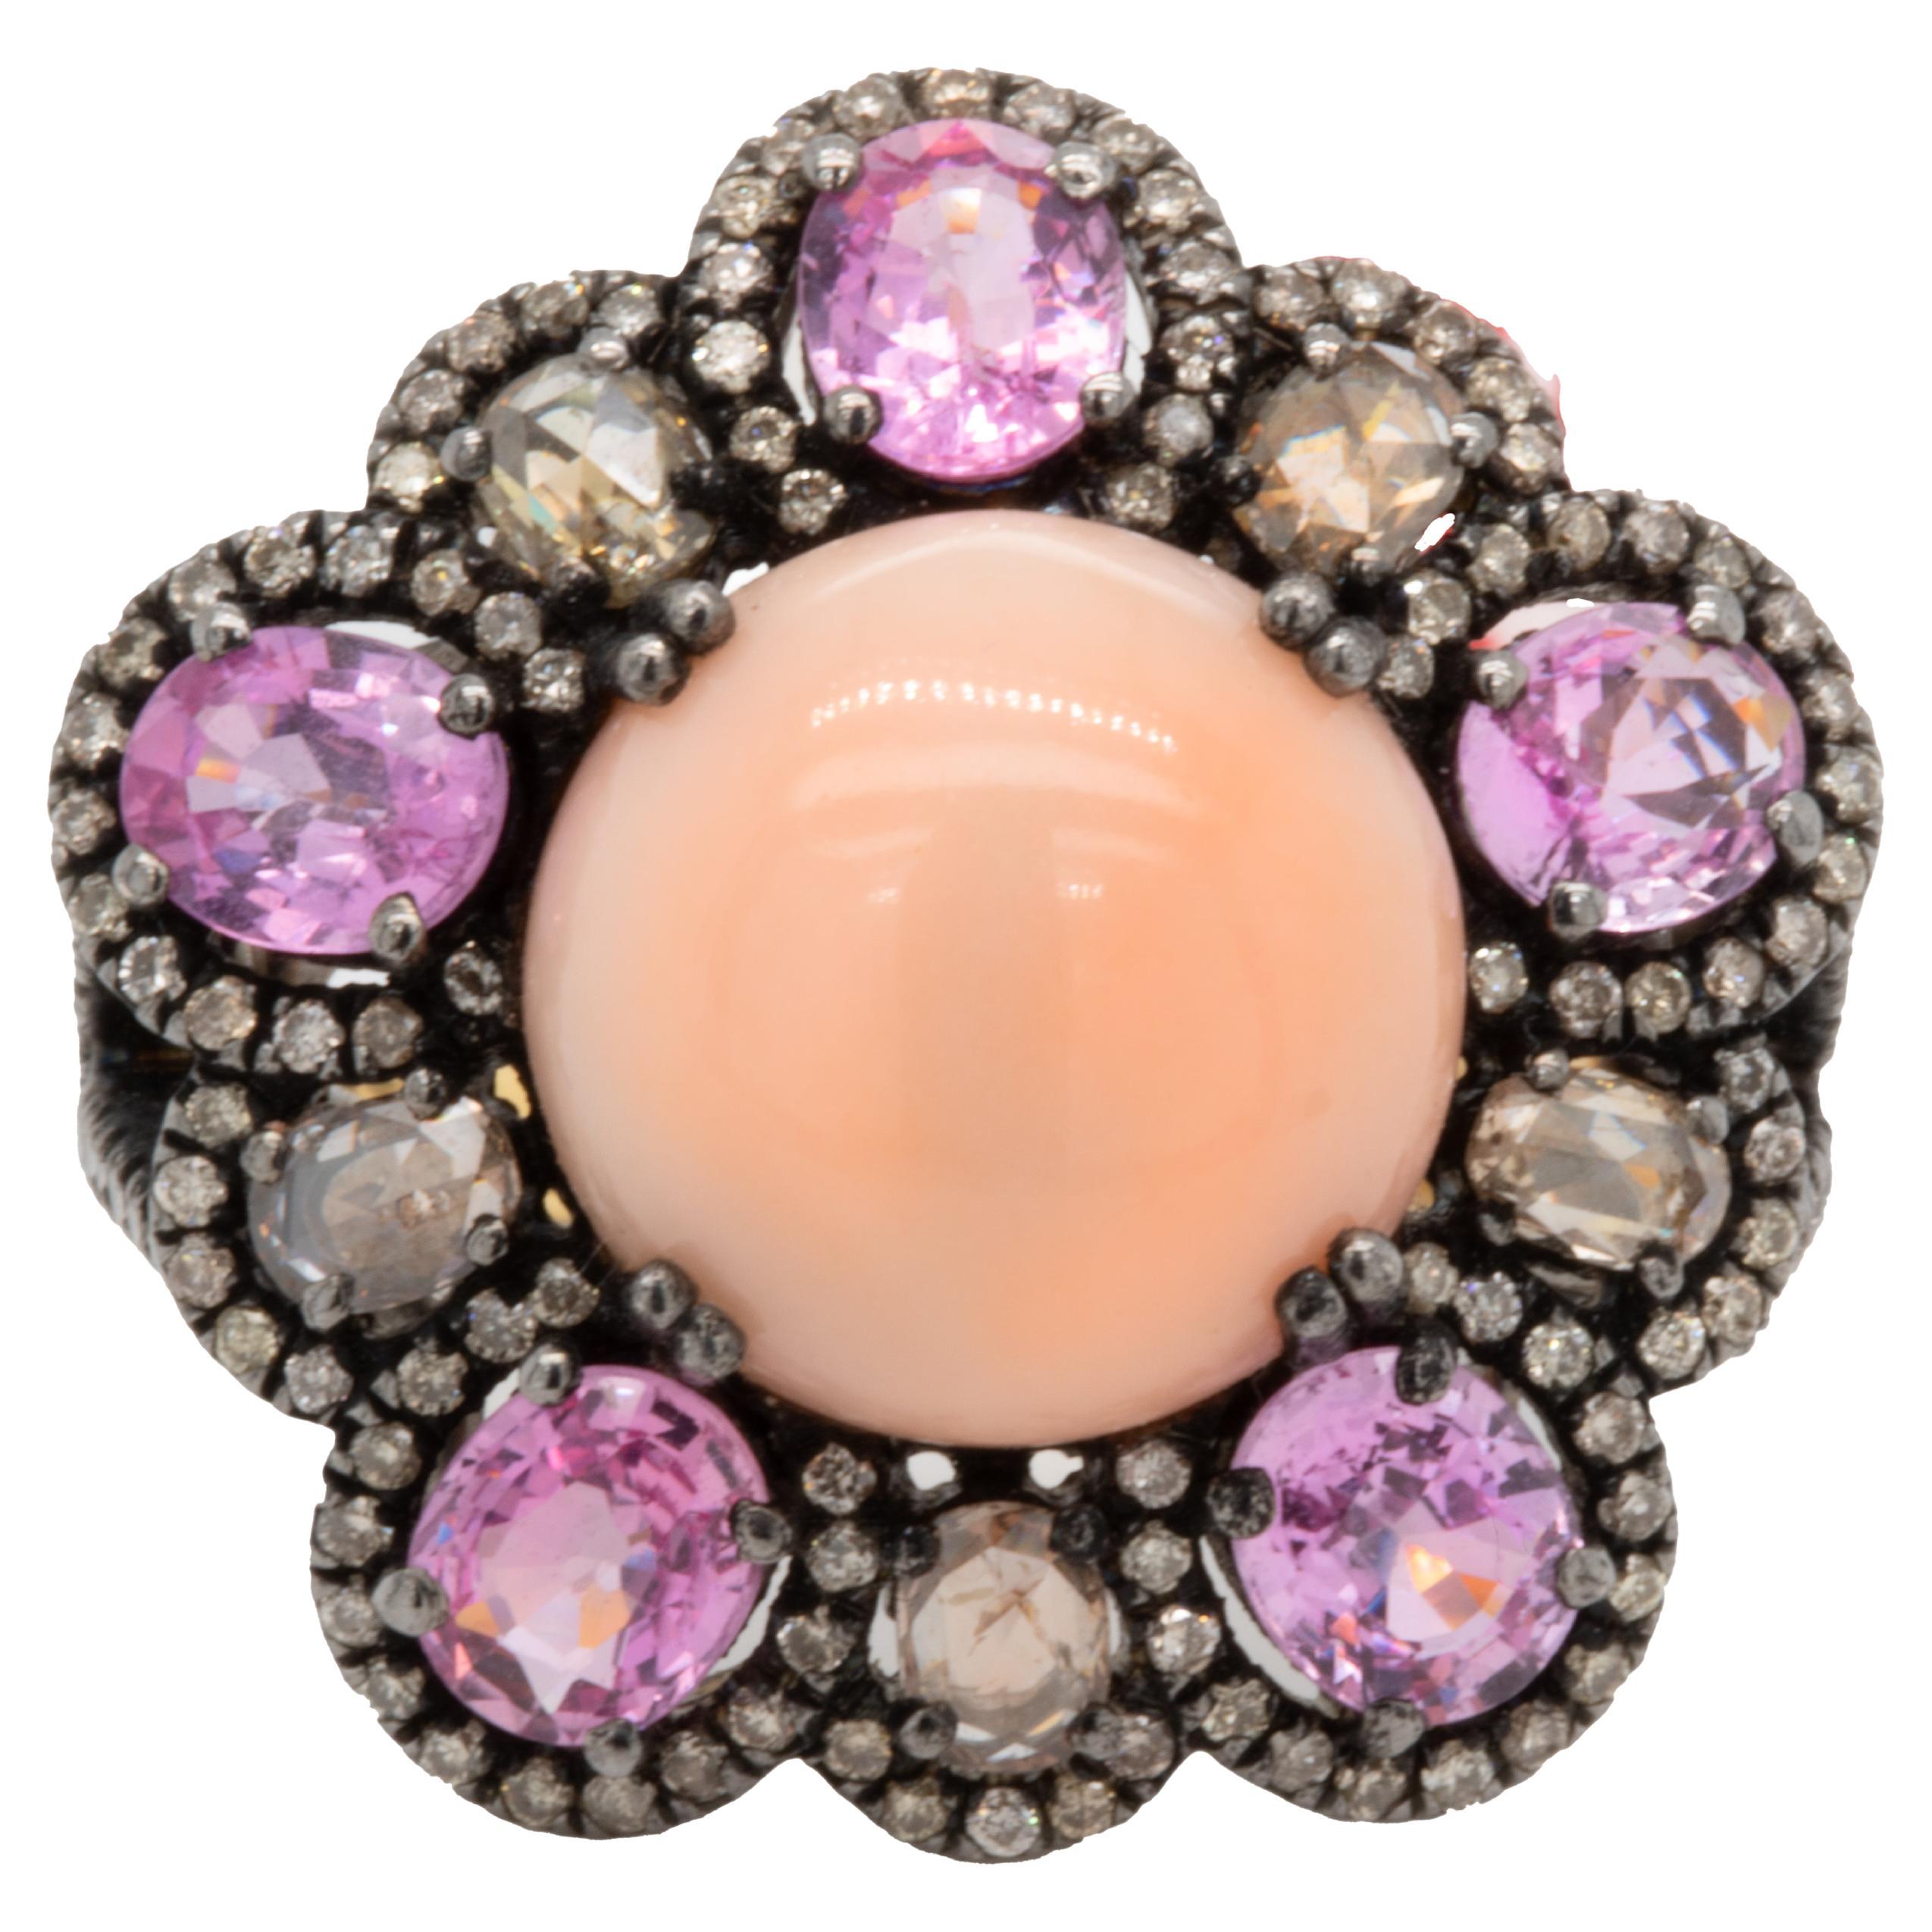 Coral Ring With Pink Sapphires and Diamonds 3.28 Carats Silver